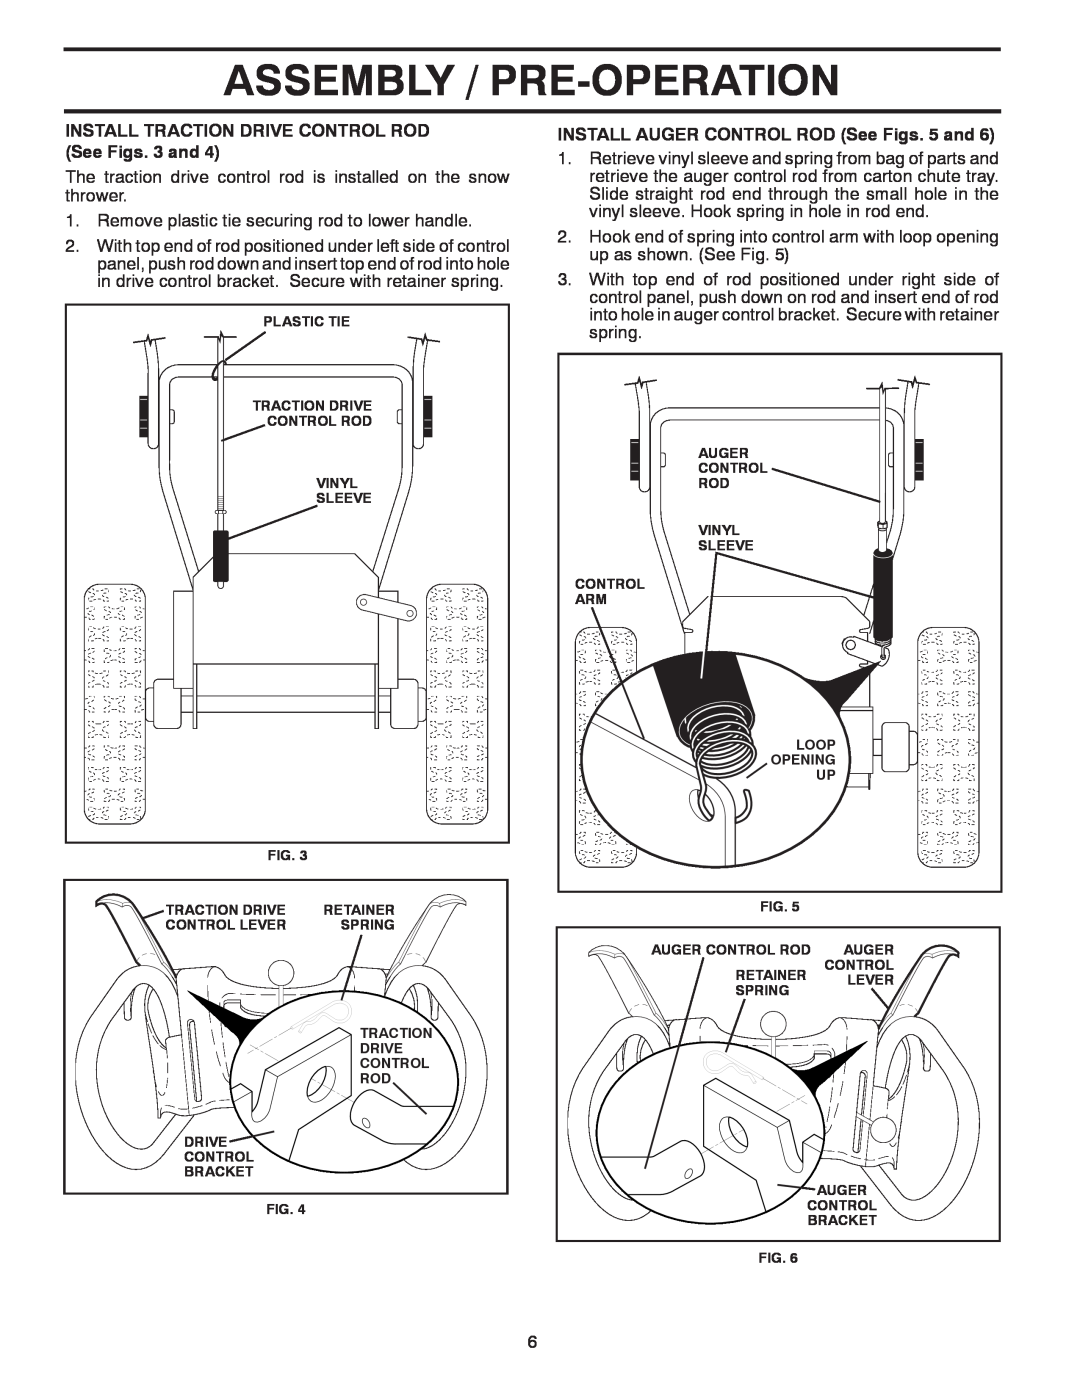 Poulan 96192003100, PR1030ES owner manual Assembly / Pre-Operation, INSTALL TRACTION DRIVE CONTROL ROD See Figs. 3 and 